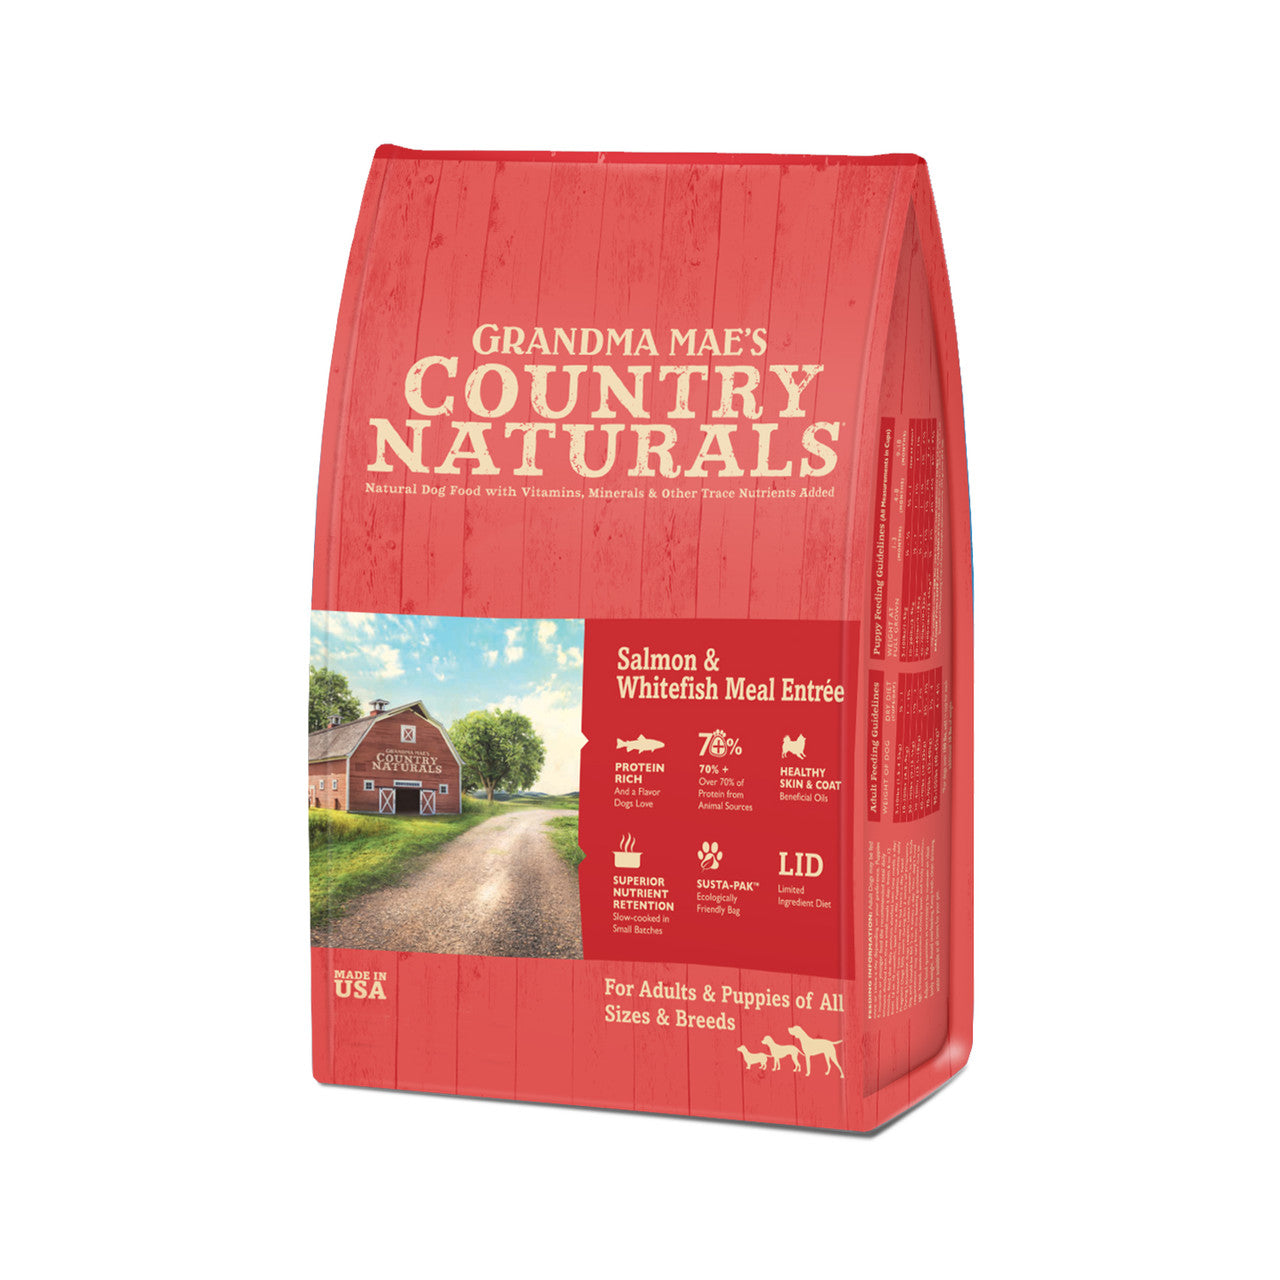 Grandma Mae's Country Naturals Dry Dog Food Salmon & Whitefish Meal 4lb